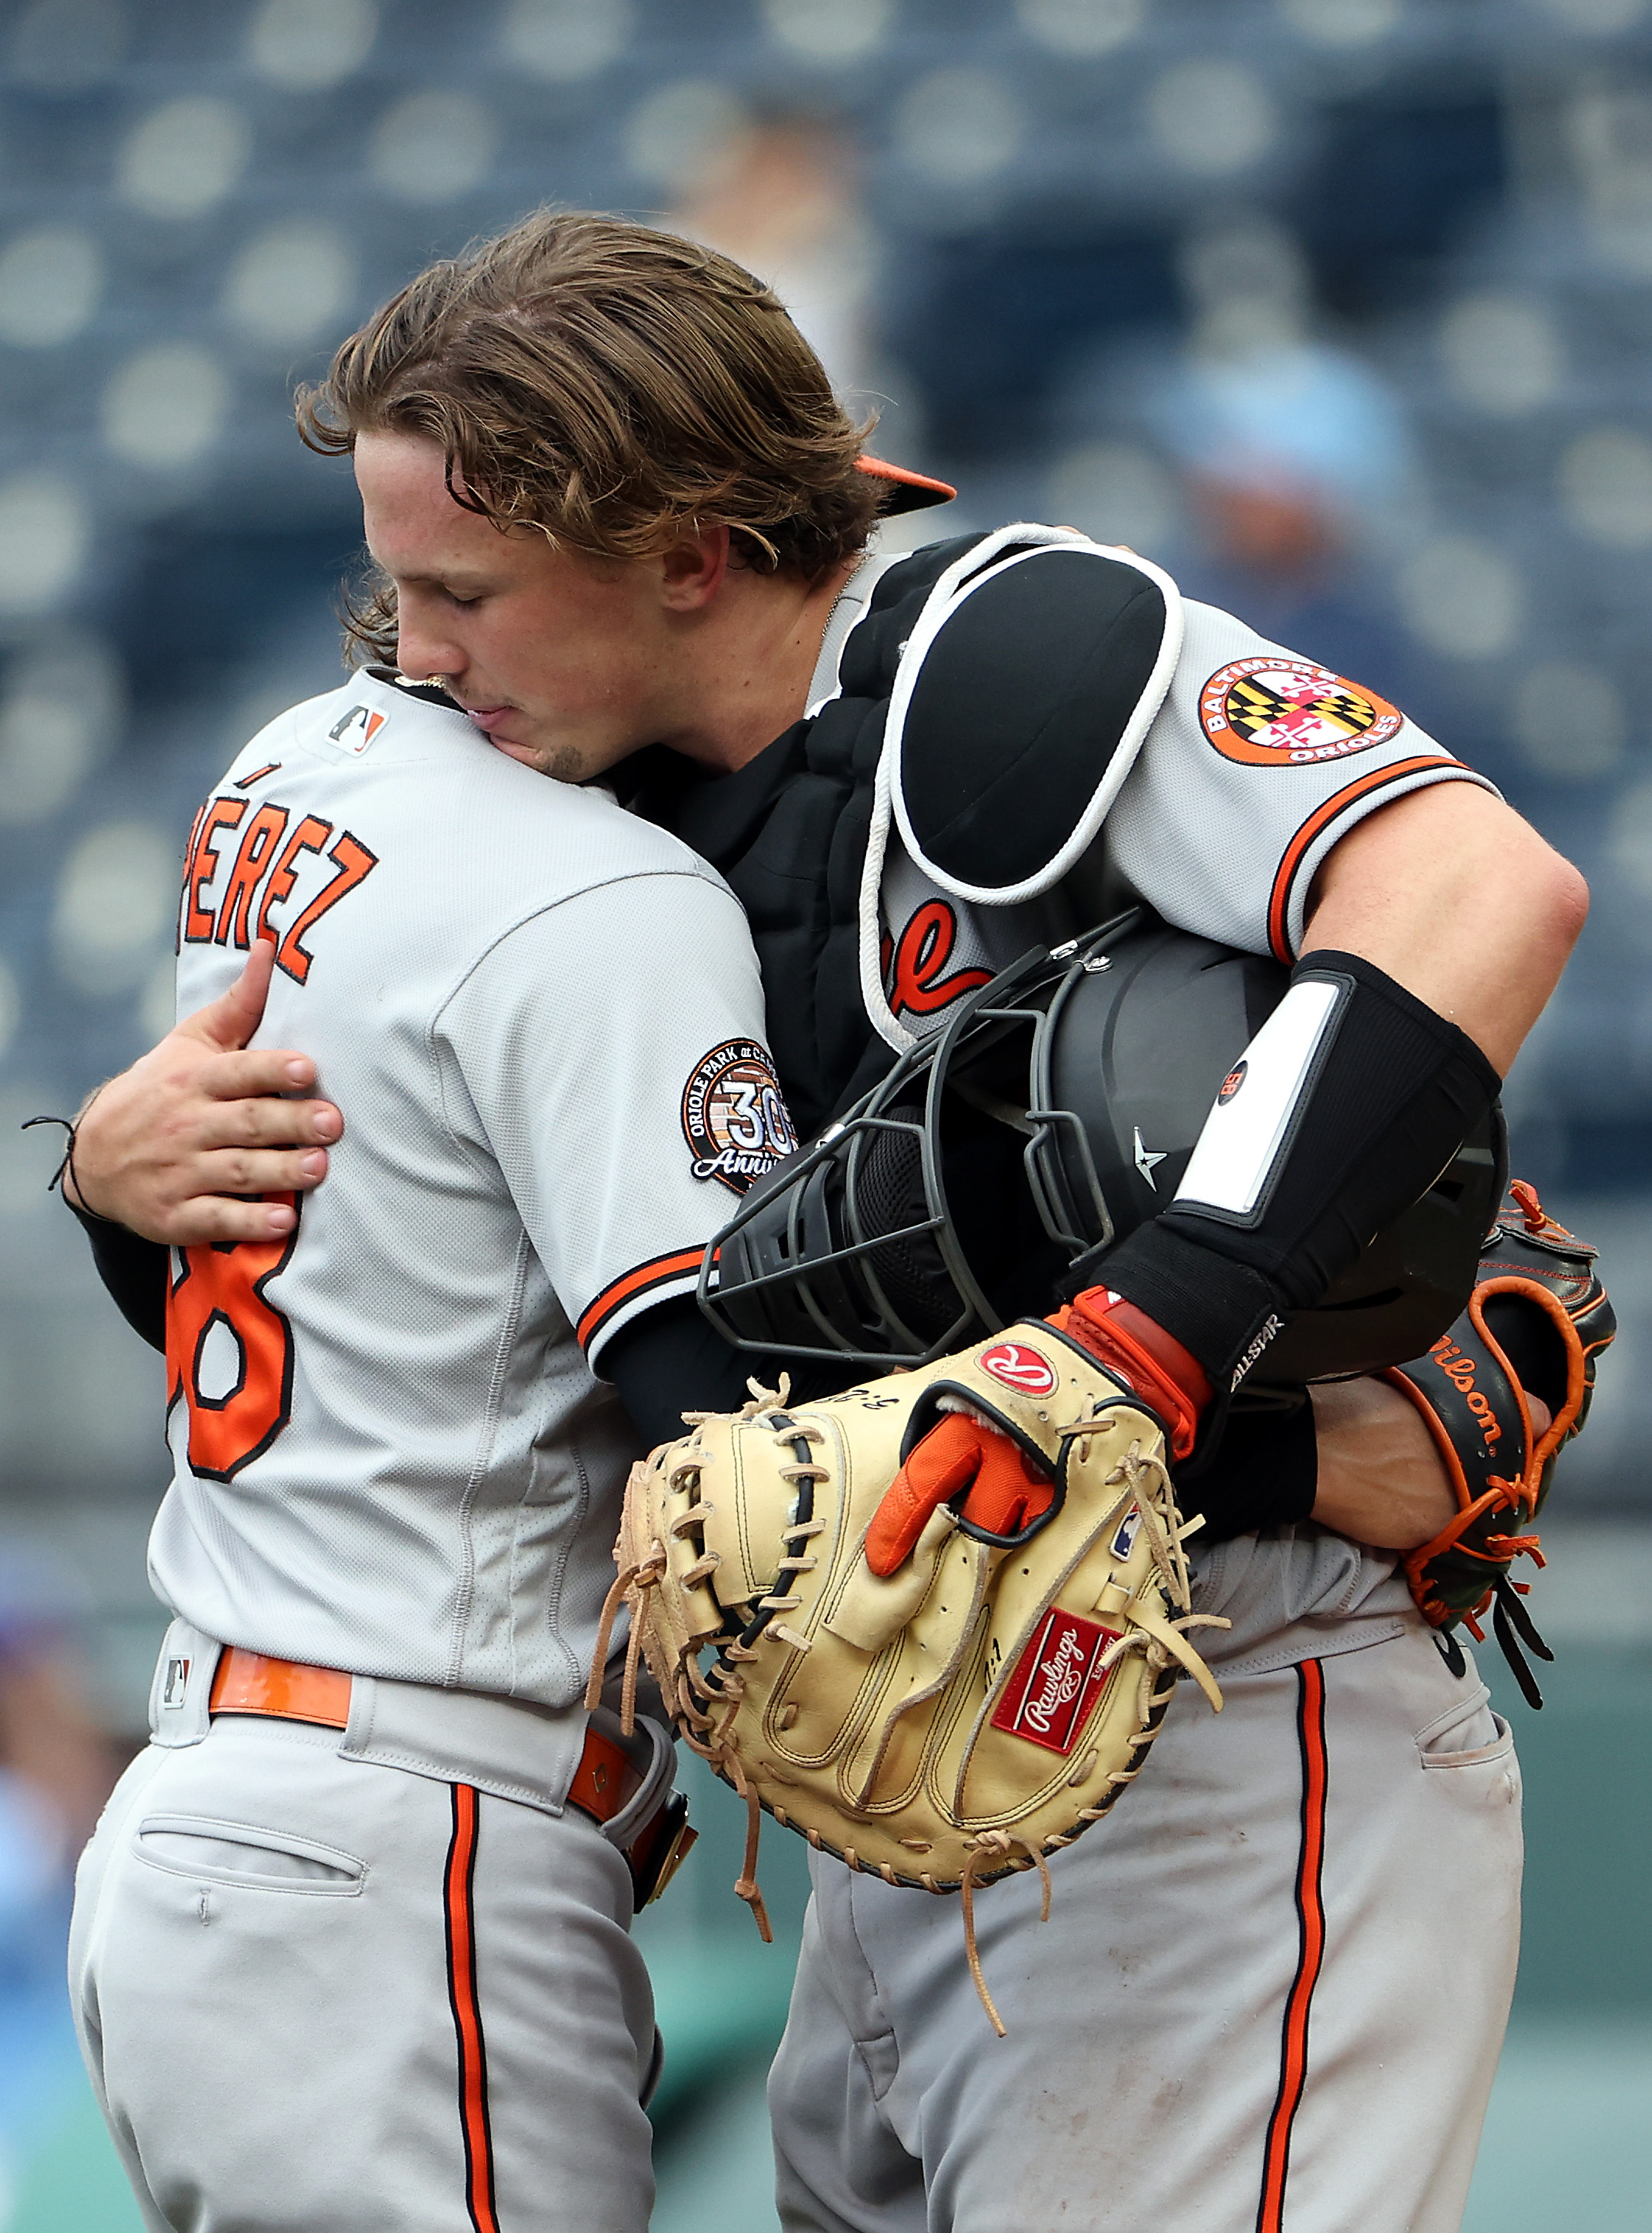 Adley Rutschman and Cionel Perez celebrate the win over the royals with a hug